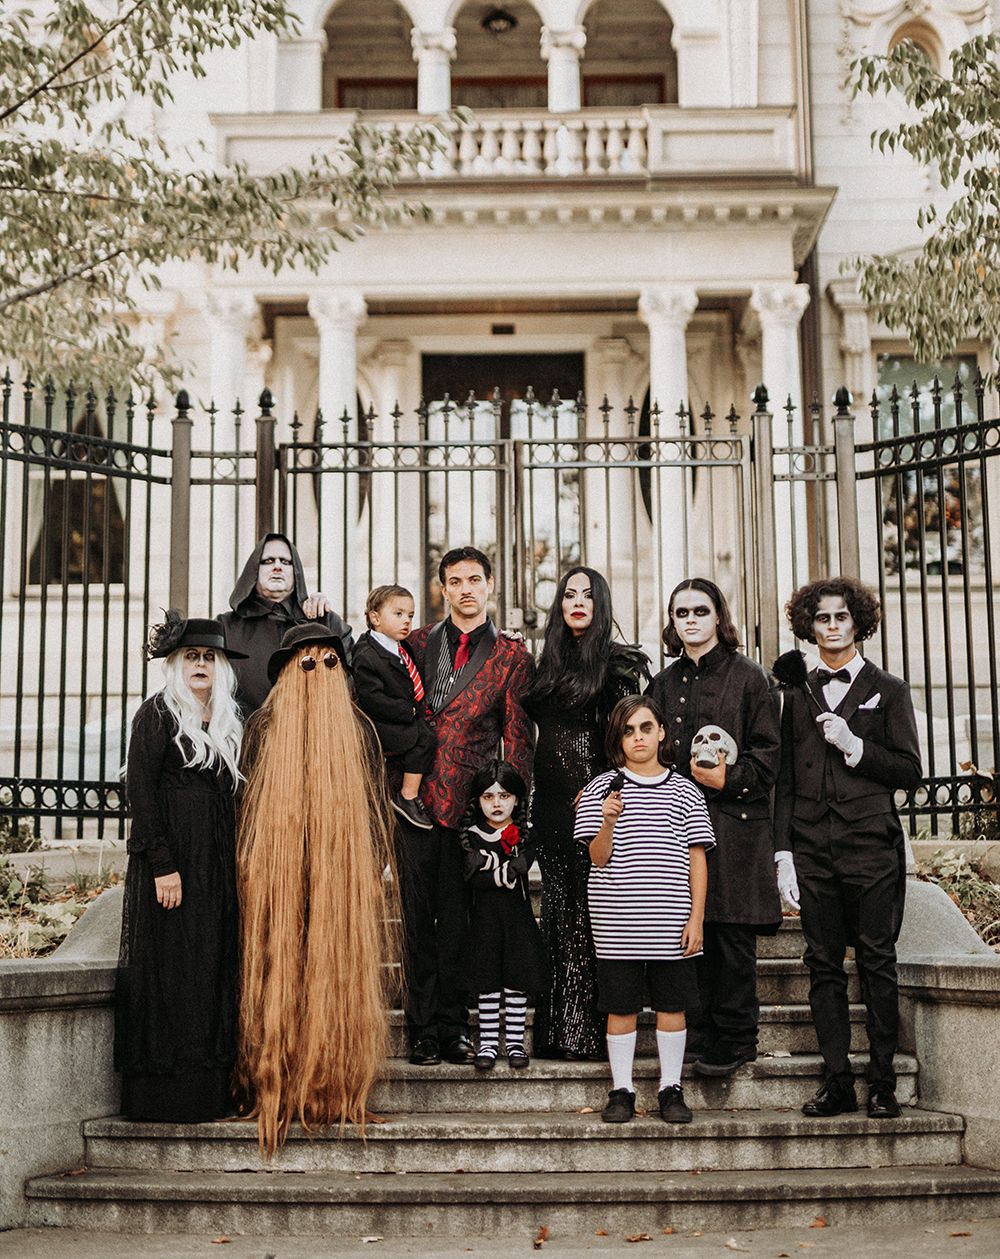 The addams family costumes